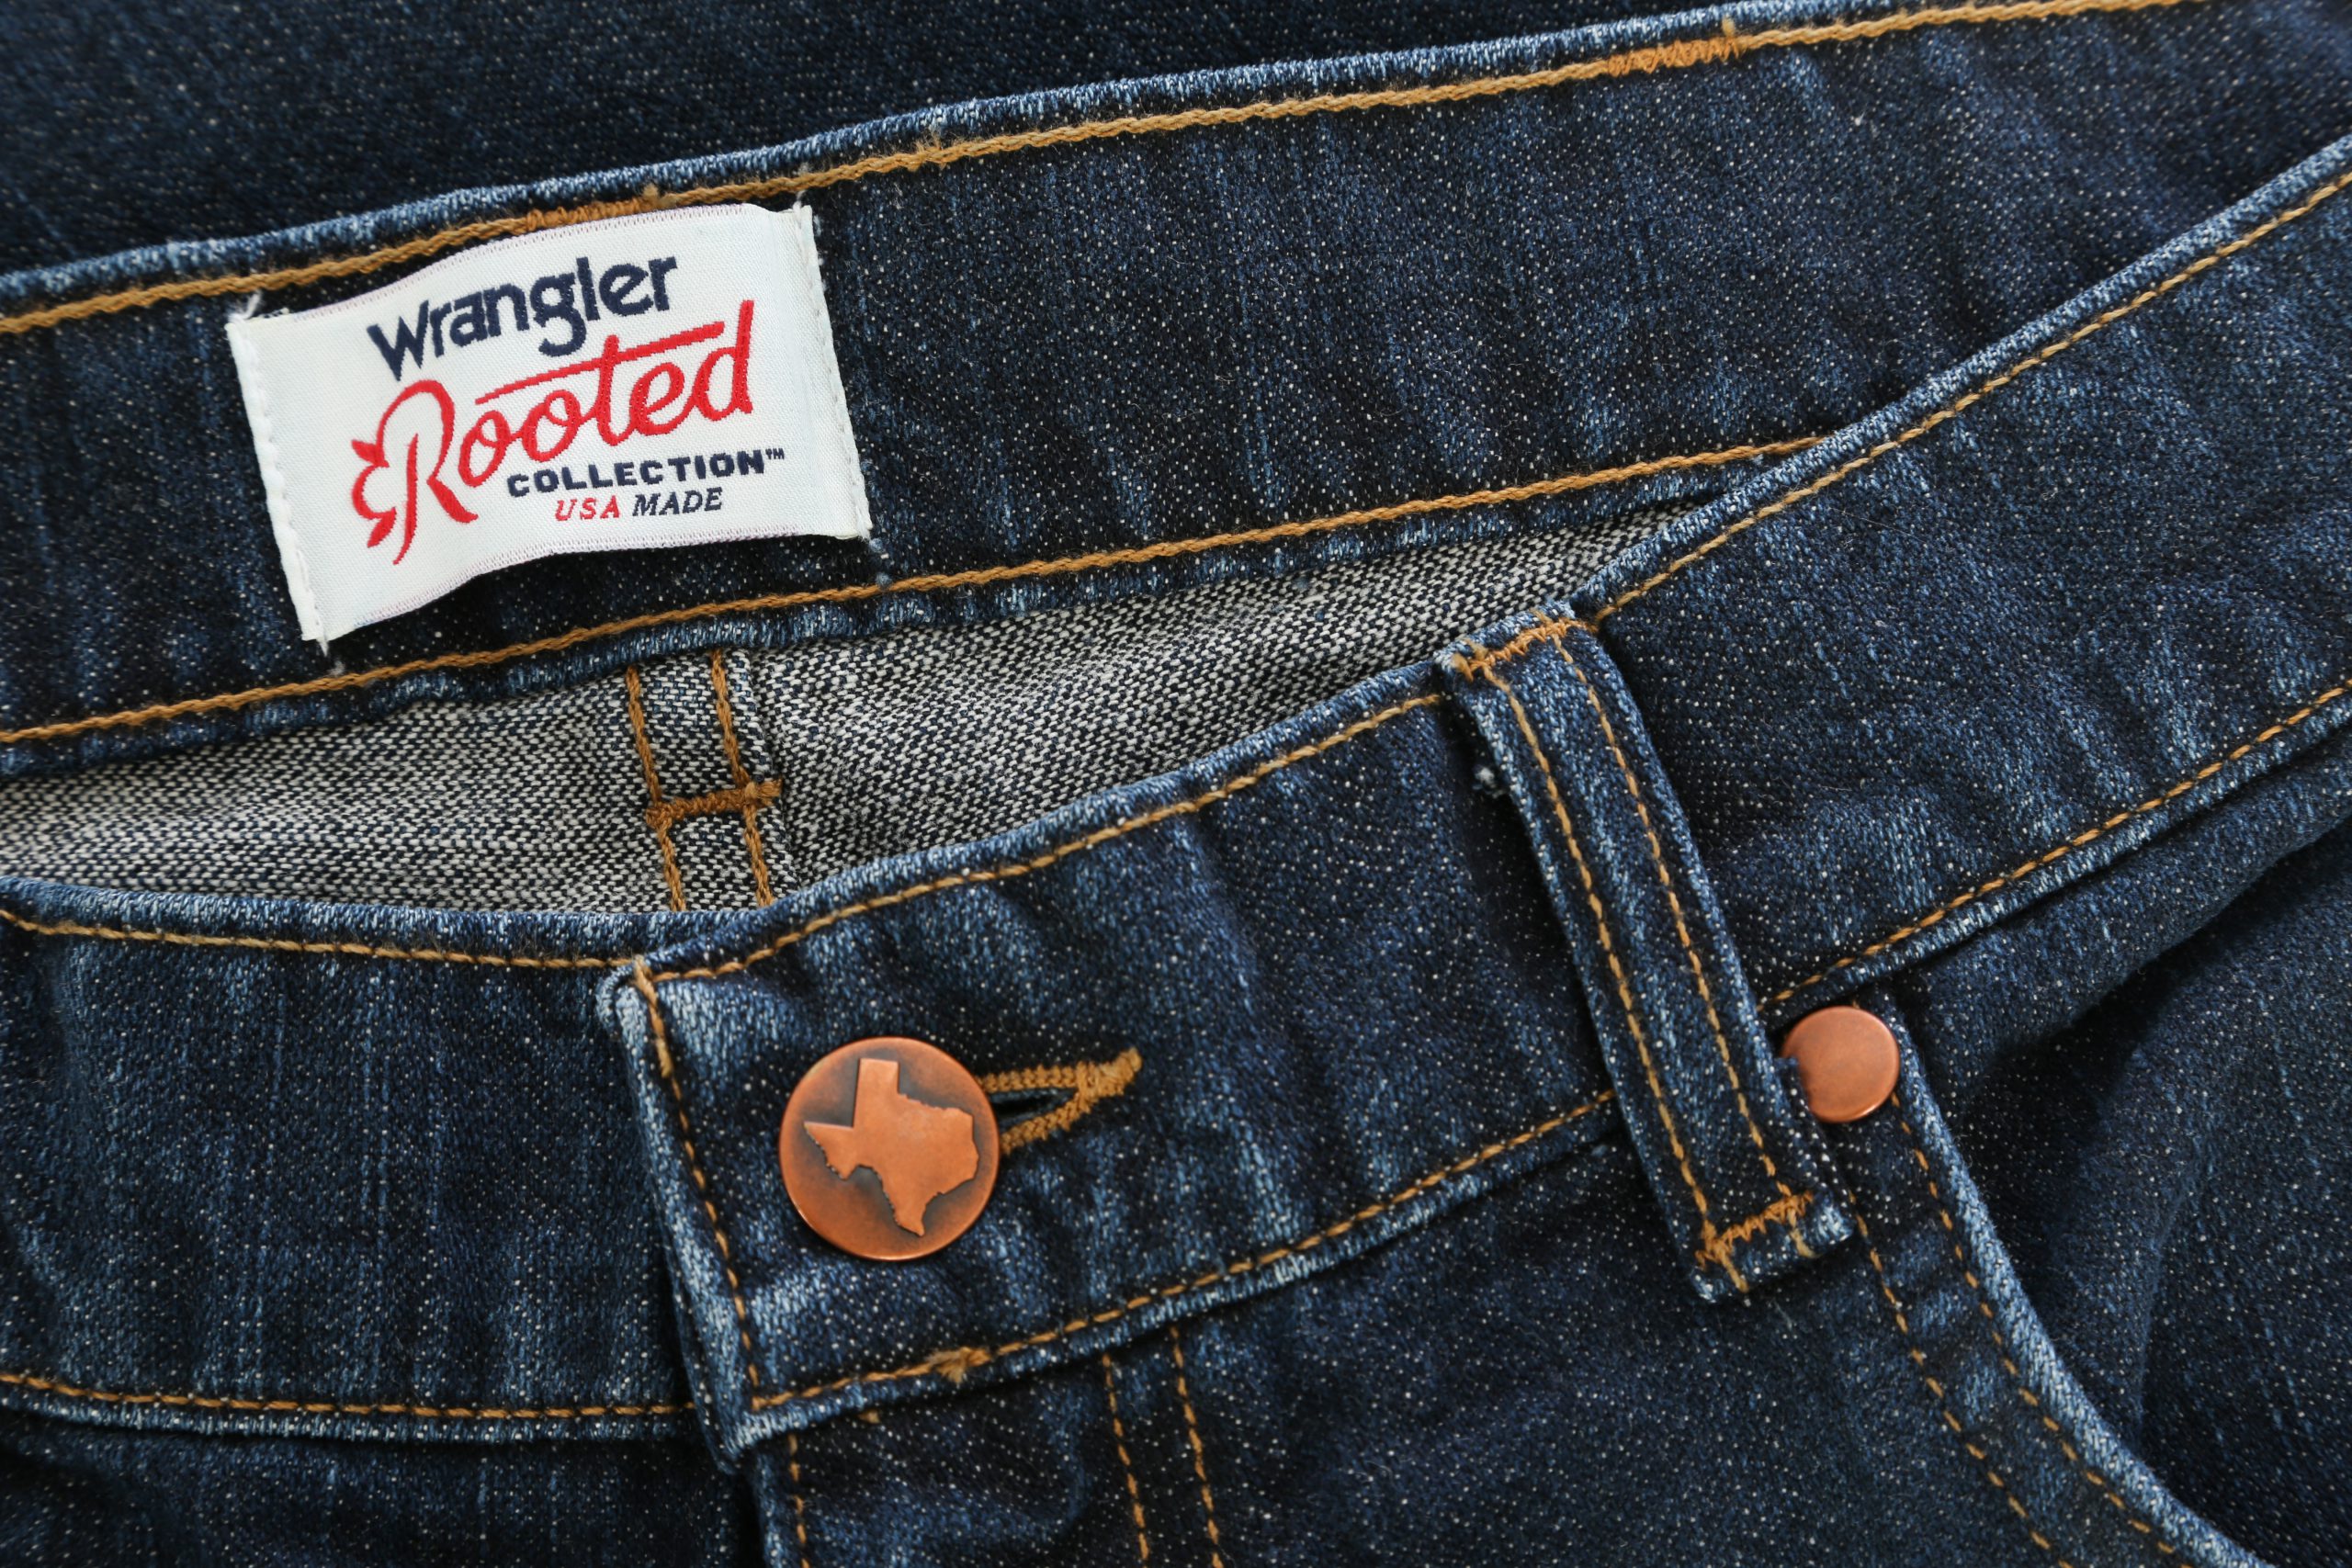 Wade Beskæftiget Lærd Wrangler Gets Rooted: Denim Company Rolls Out Fully American-made Jeans -  Alliance for American Manufacturing